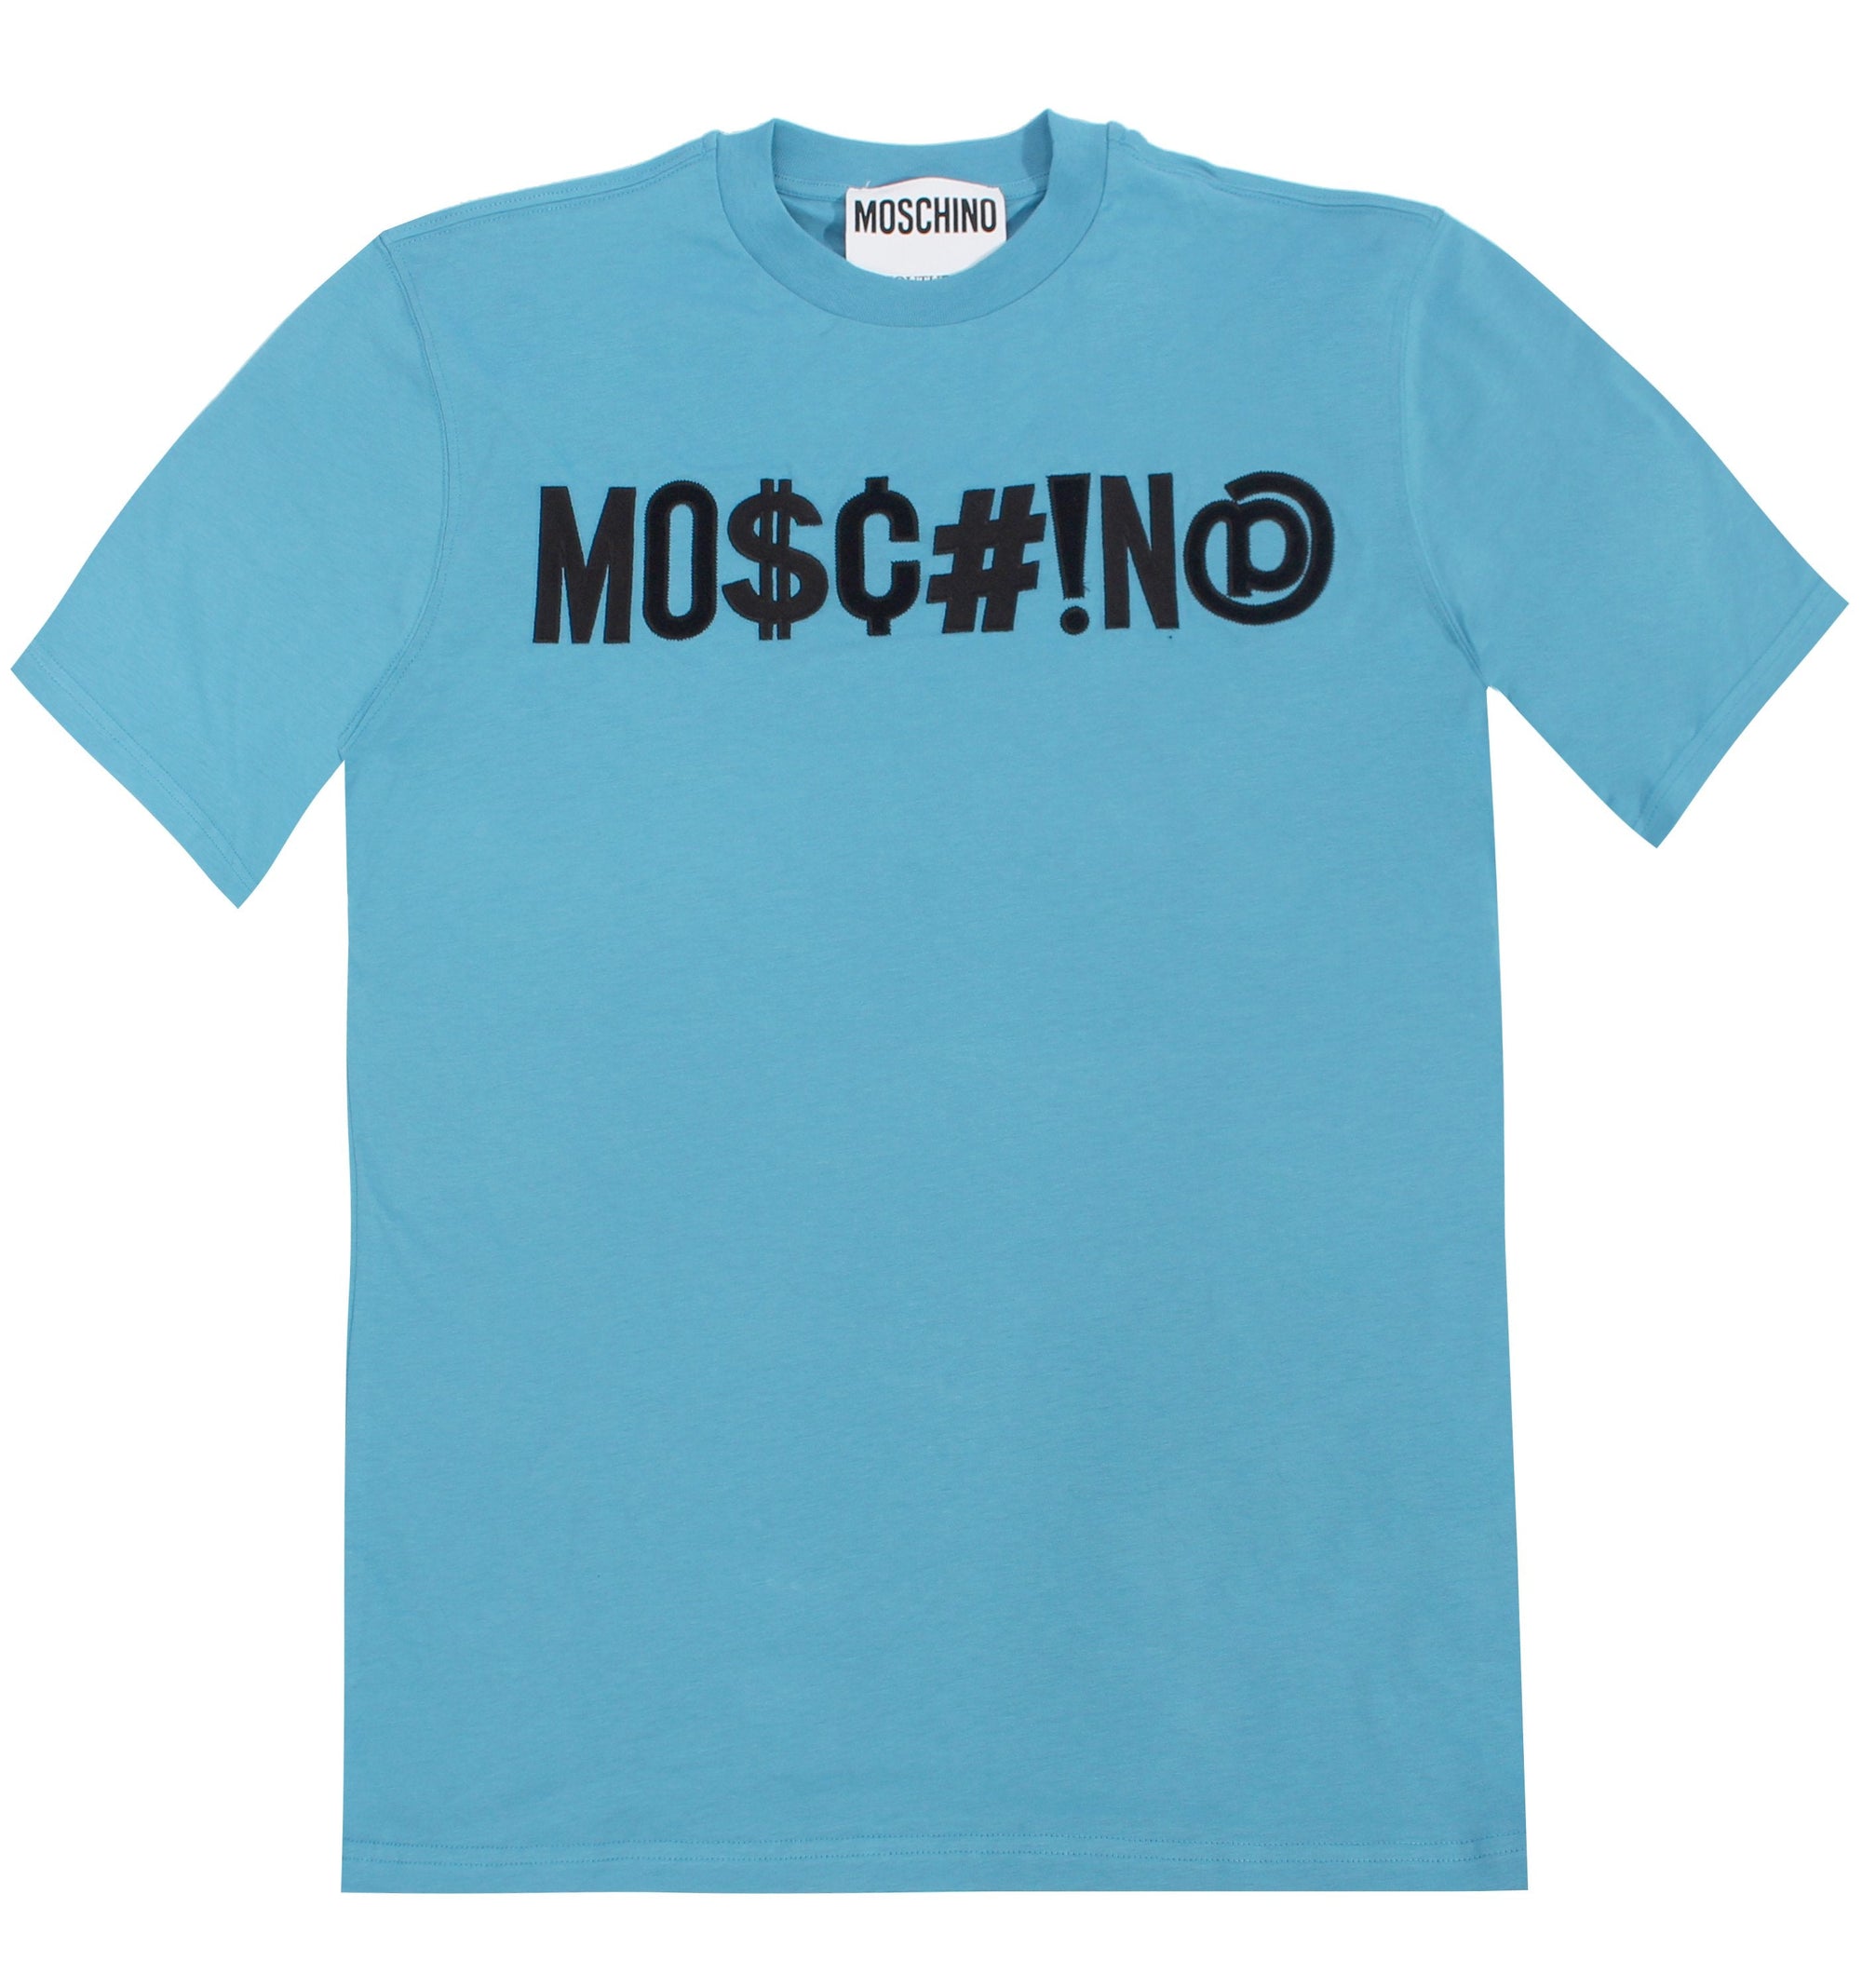 M0$c#!n@ Embroidered Tee - Blue